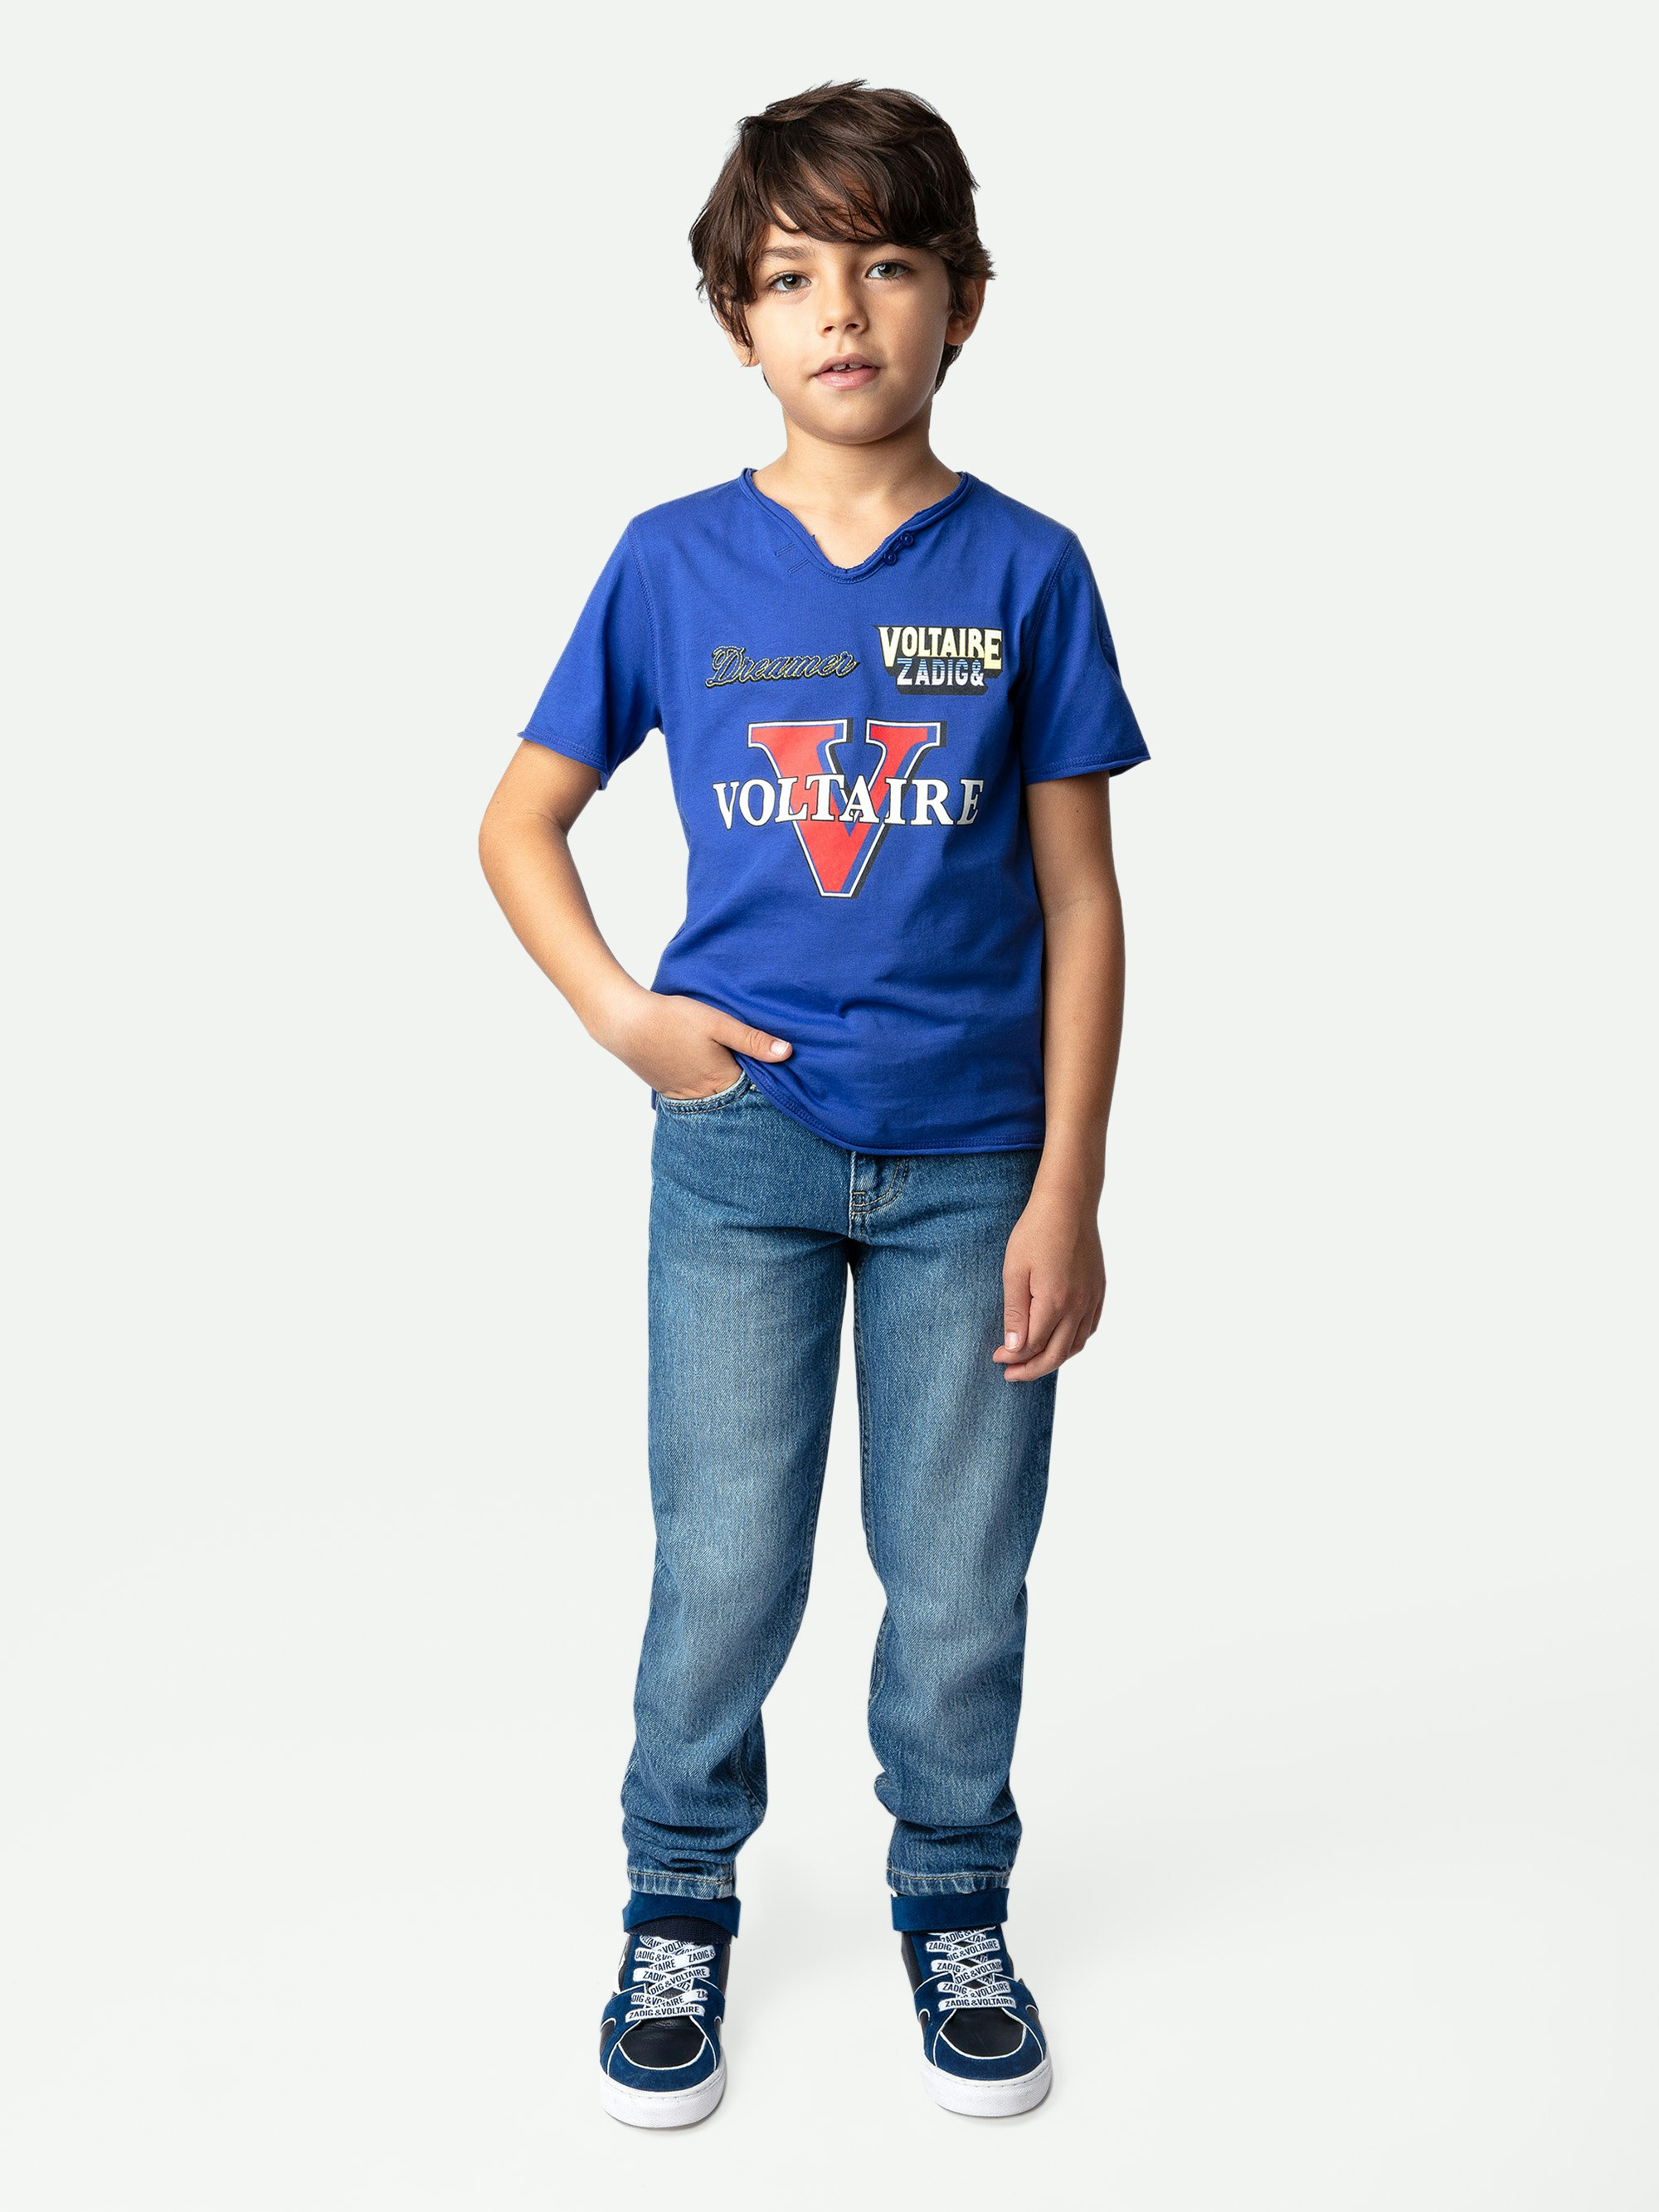 Boxer Boys’ T-shirt - Boys’ blue short-sleeved cotton jersey T-shirt with illustrations and embroidery.